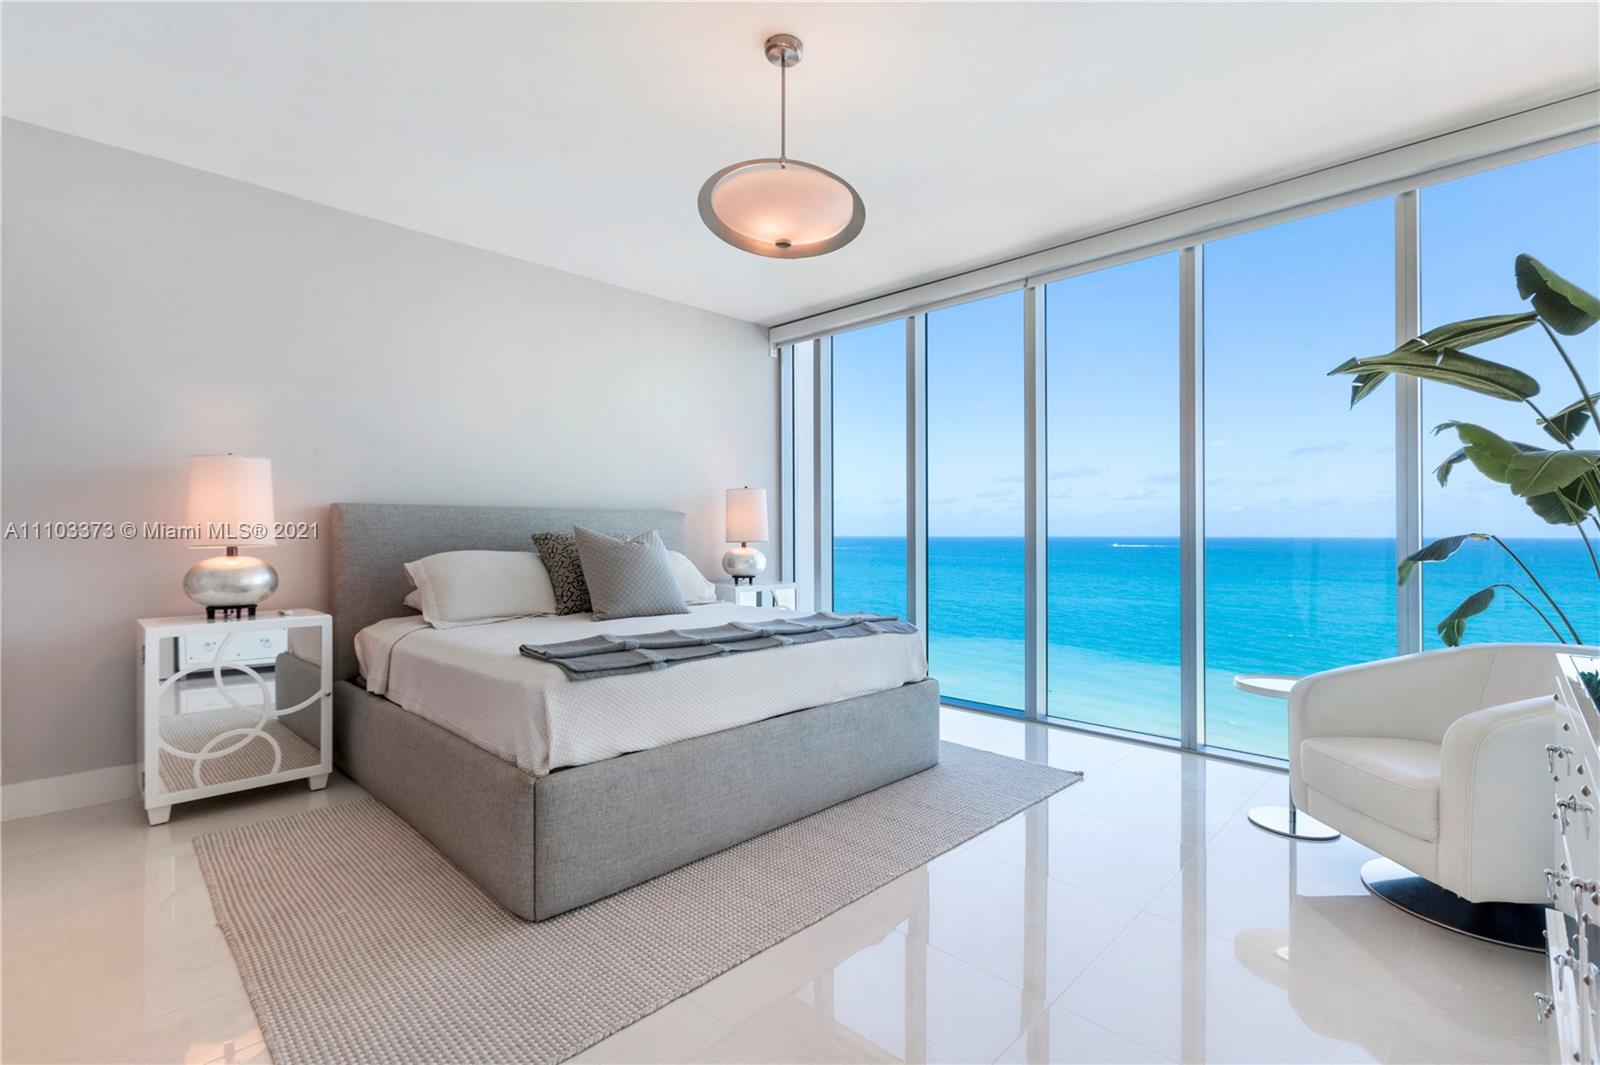 Listing Image 6899 Collins Ave #1508